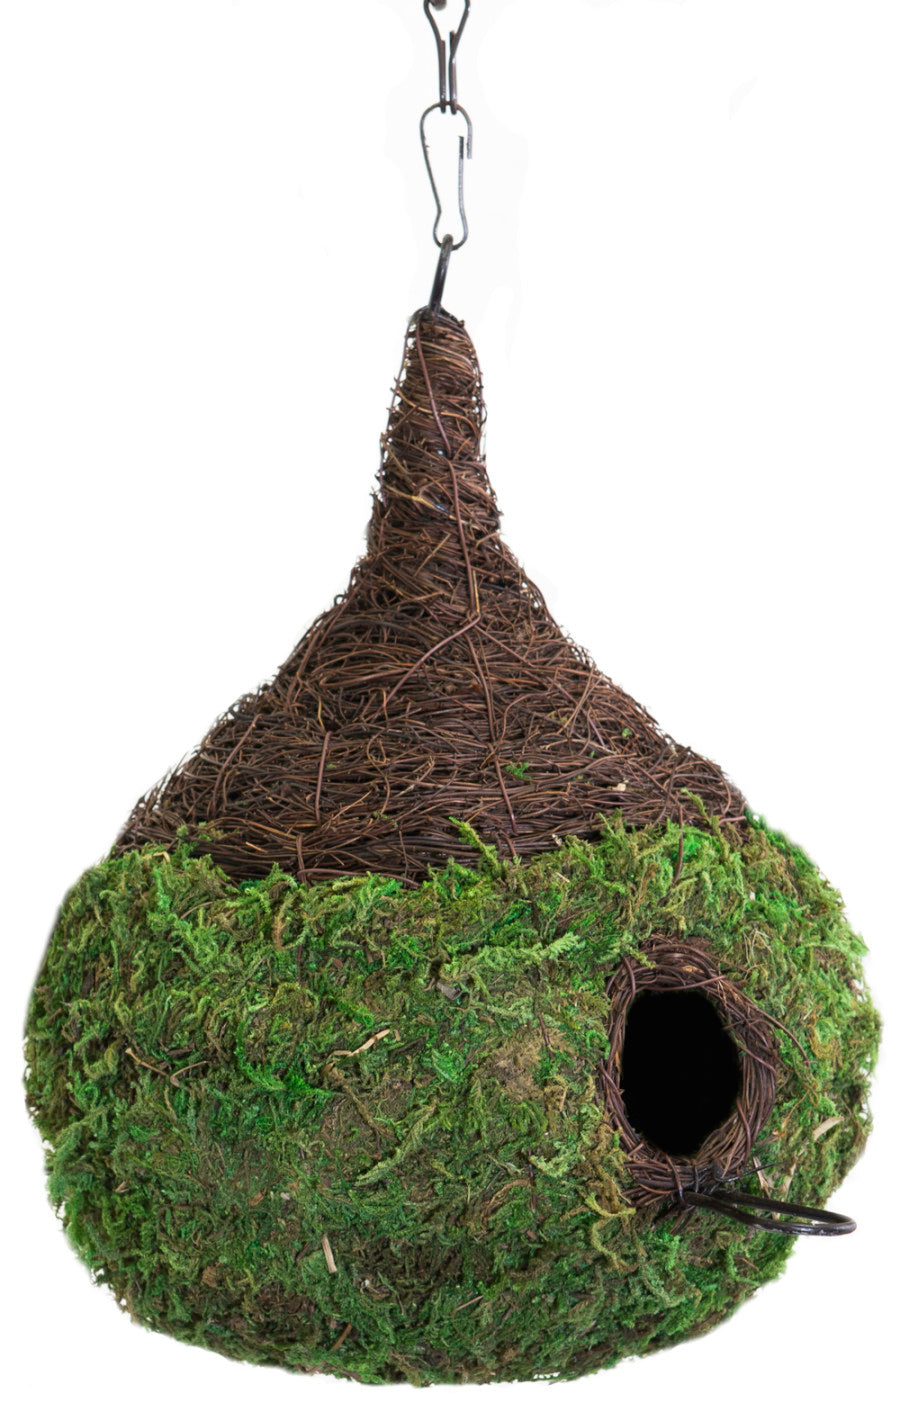 A hanging birdhouse with a raindrop shape. The top is brown and the bottom portion is green and mossy. There is a small hole for birds to enter through with a perch outside.